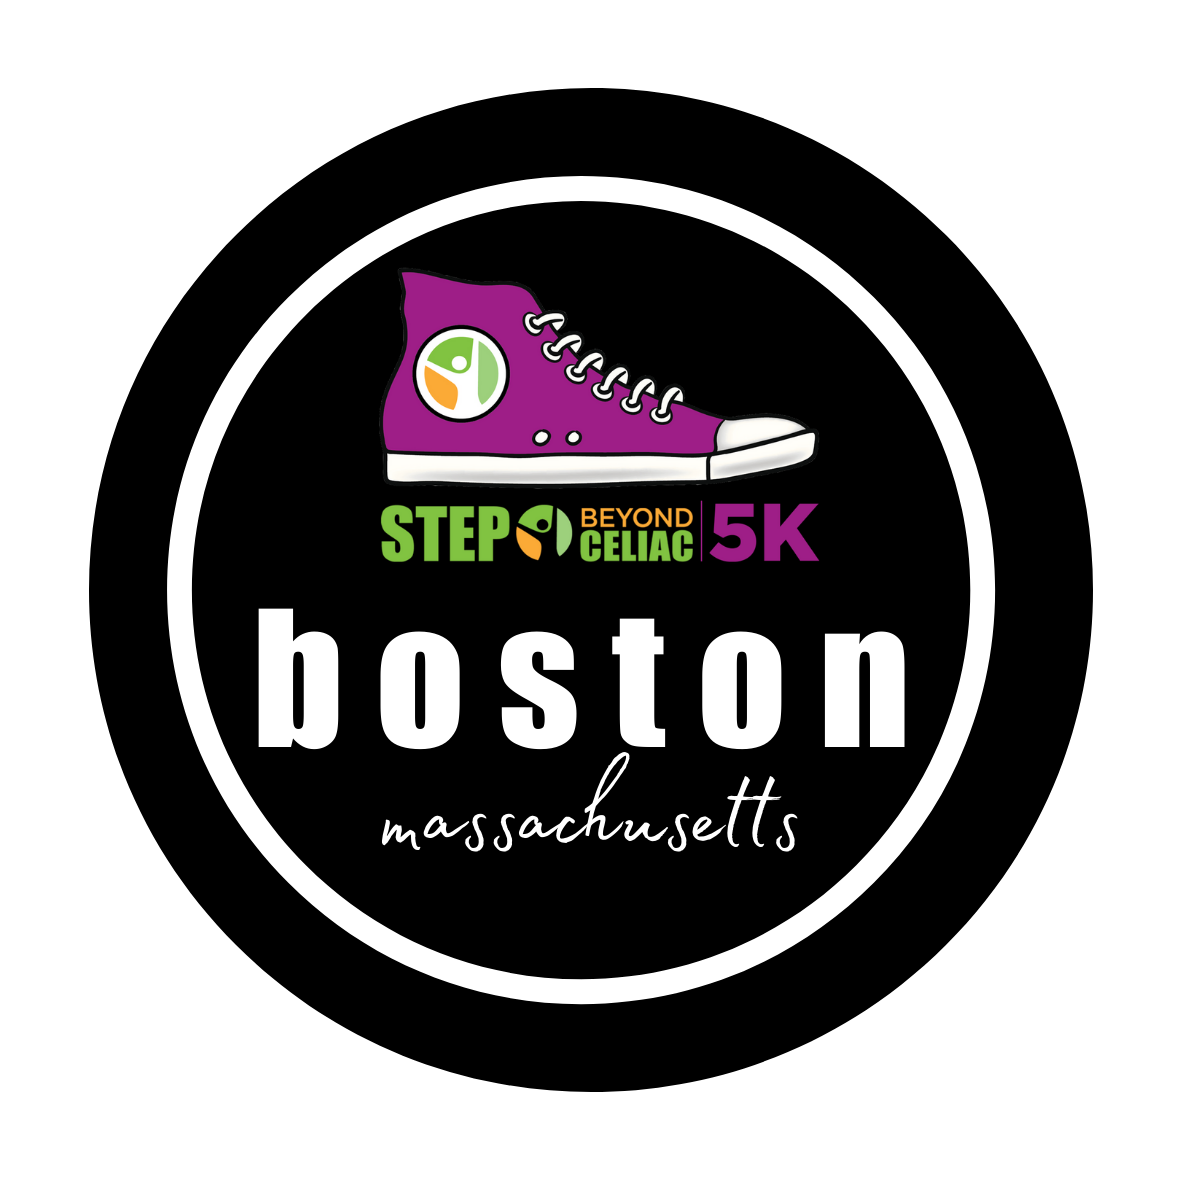 Step Beyond Celiac 5K participants are encouraged to run or walk in as many events as they can wherever they are. A commemorative T-shirt and city-specific stickers - including special three- and five-city tour stickers for those registering for multiple events - are available. The T-shirt deadline for the Boston virtual Step Beyond Celiac 5K is August 1.